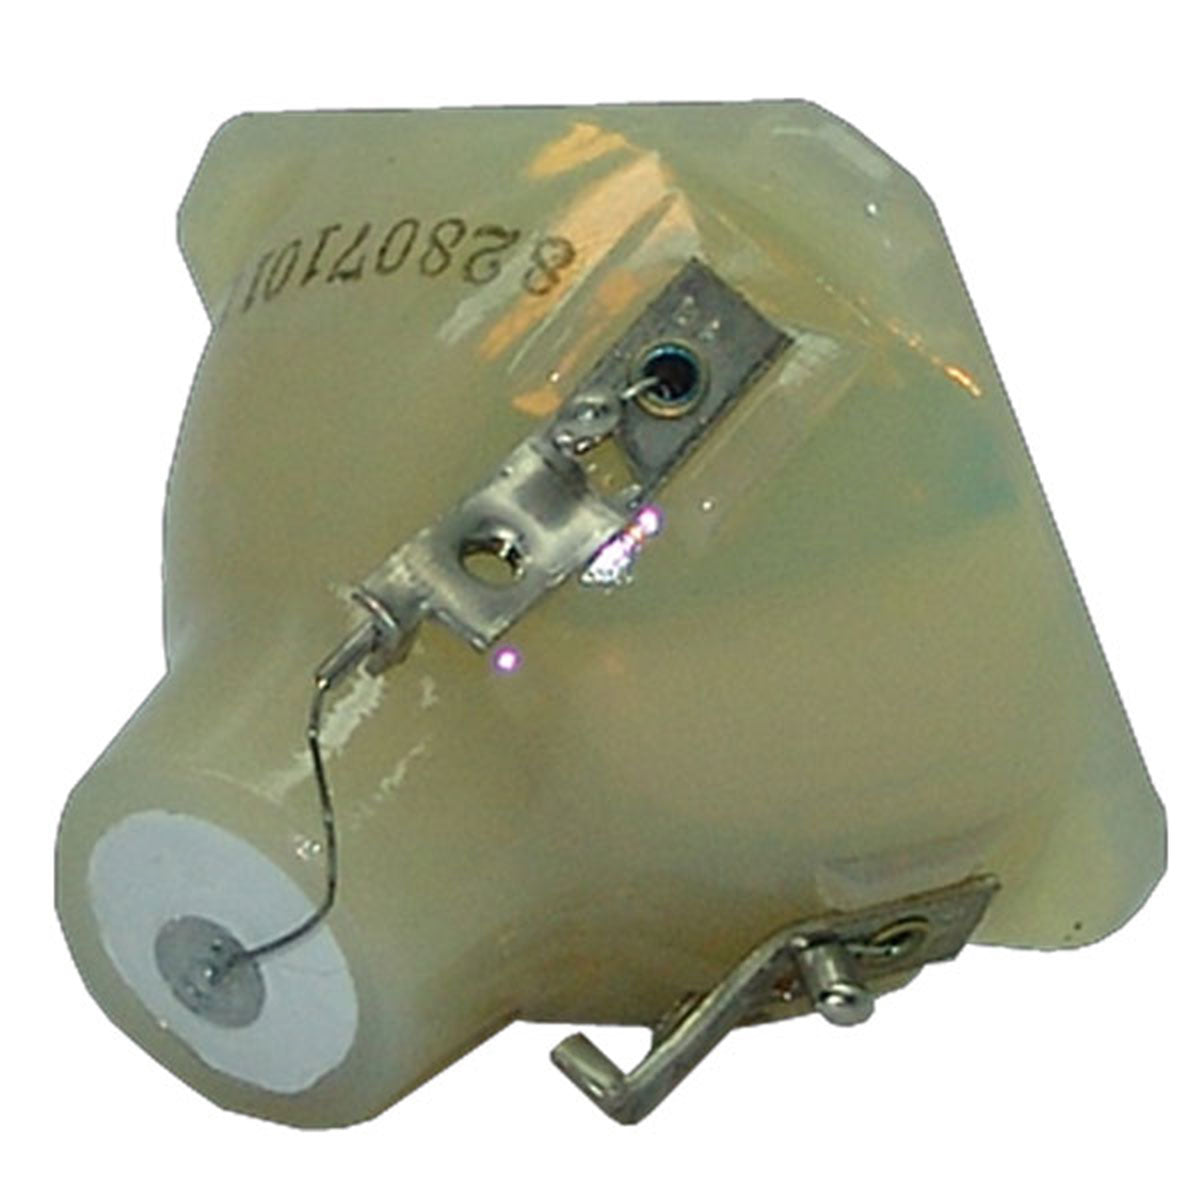 NOBO SP.82G01.001 Philips Projector Bare Lamp